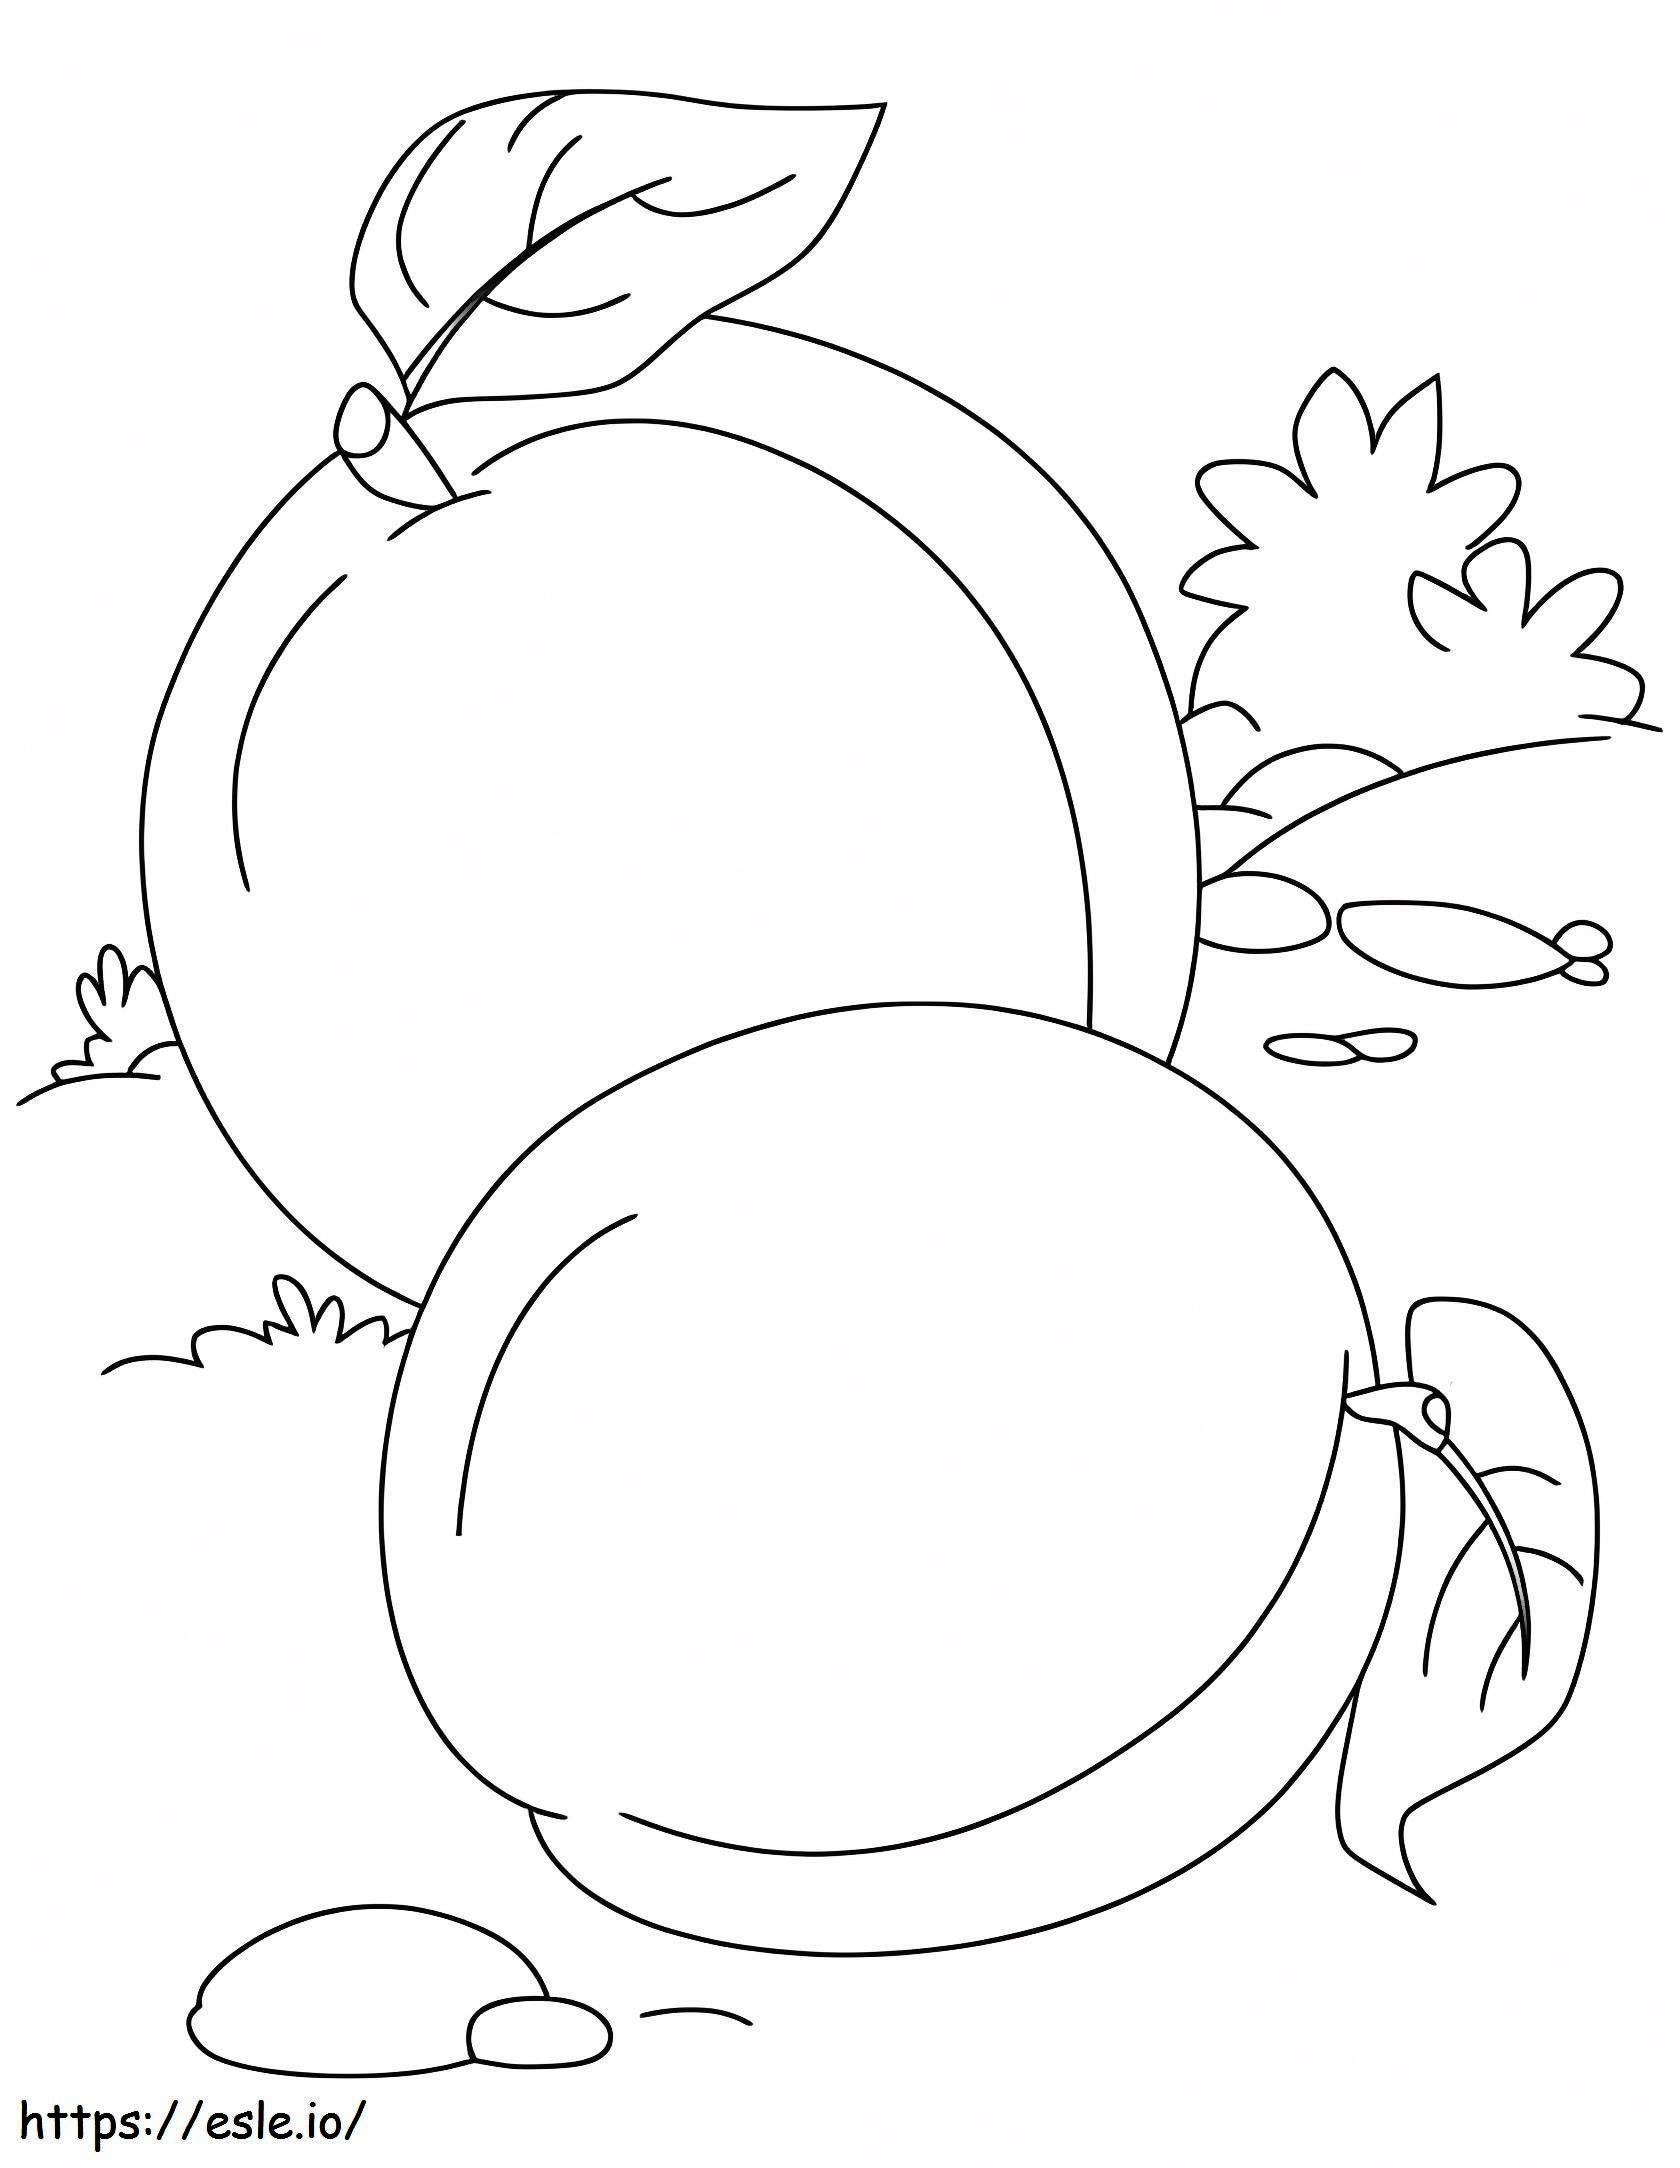 Two Basic Apricots coloring page